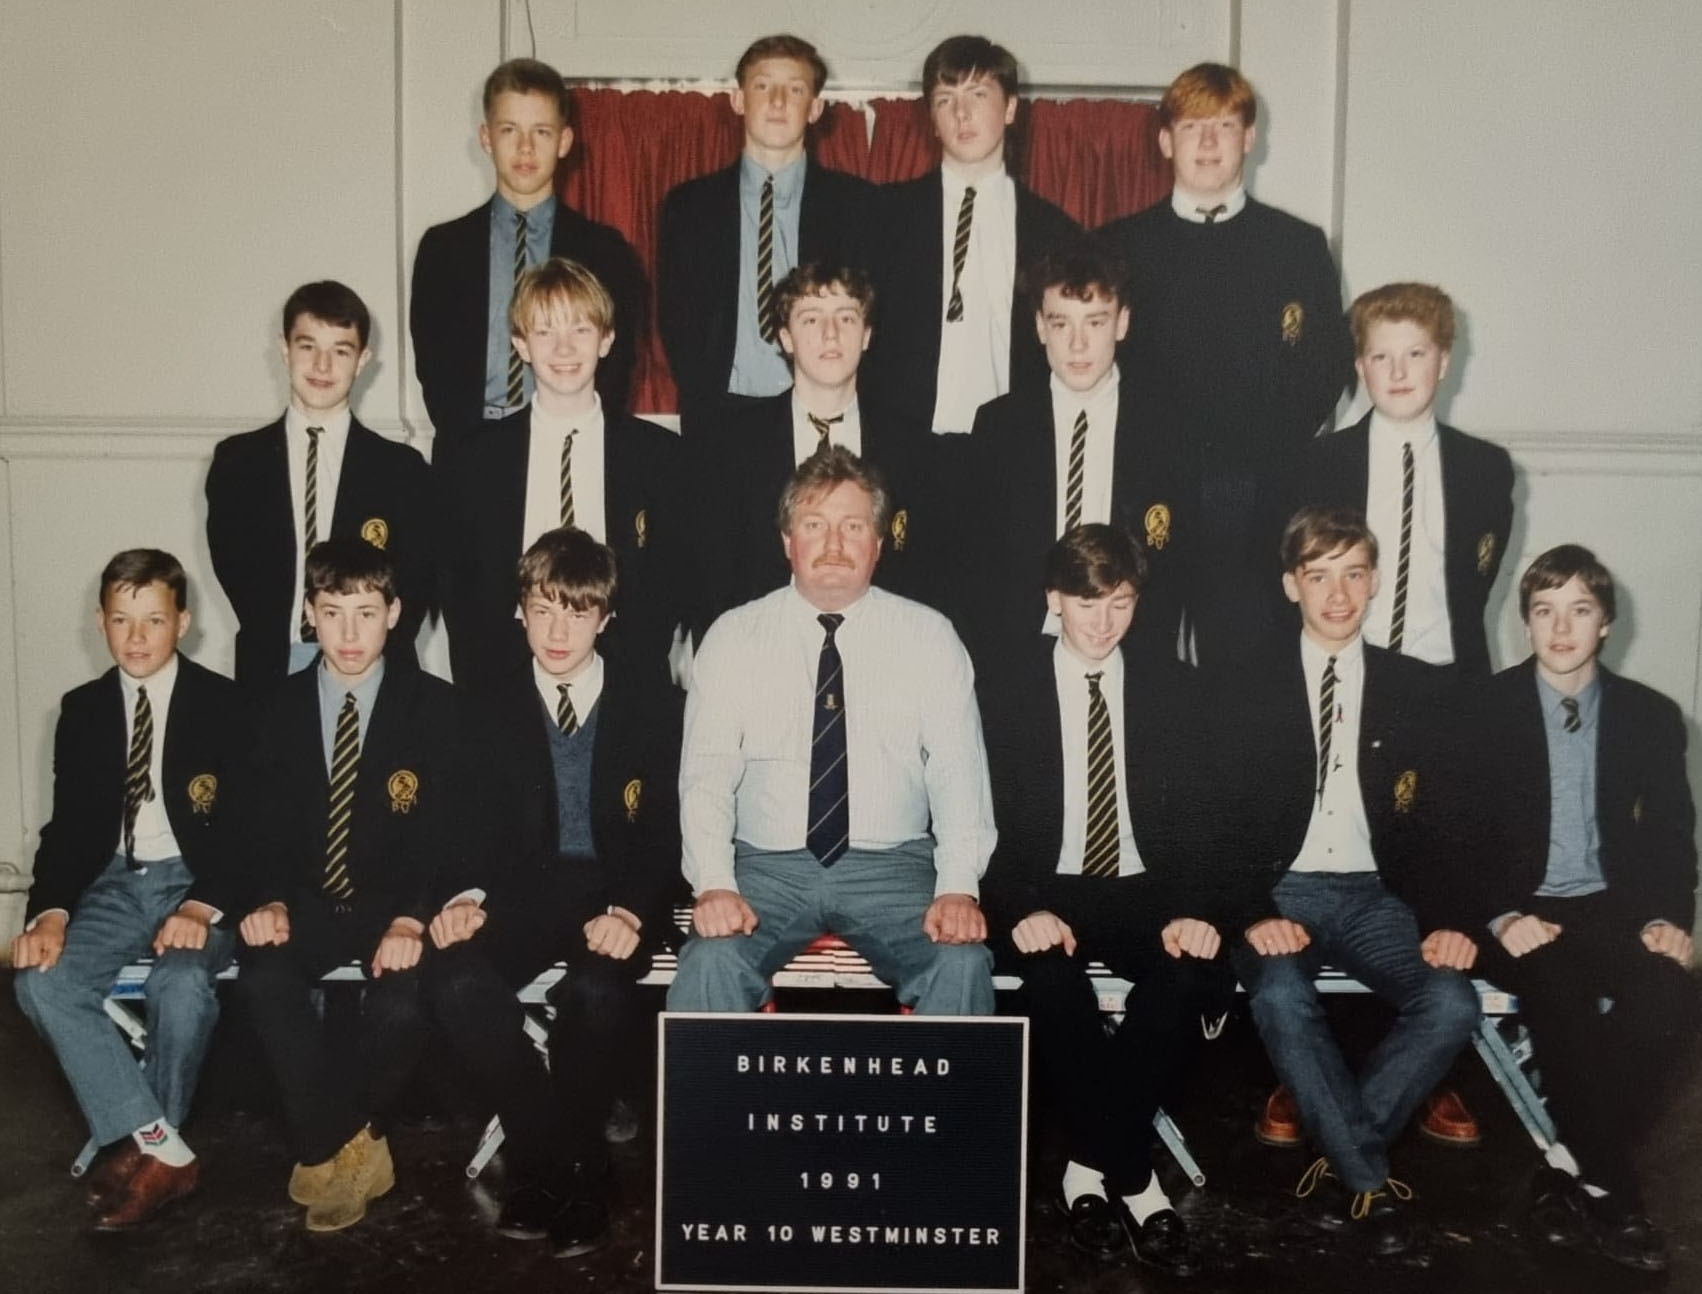 1991 Year 10 Westminster